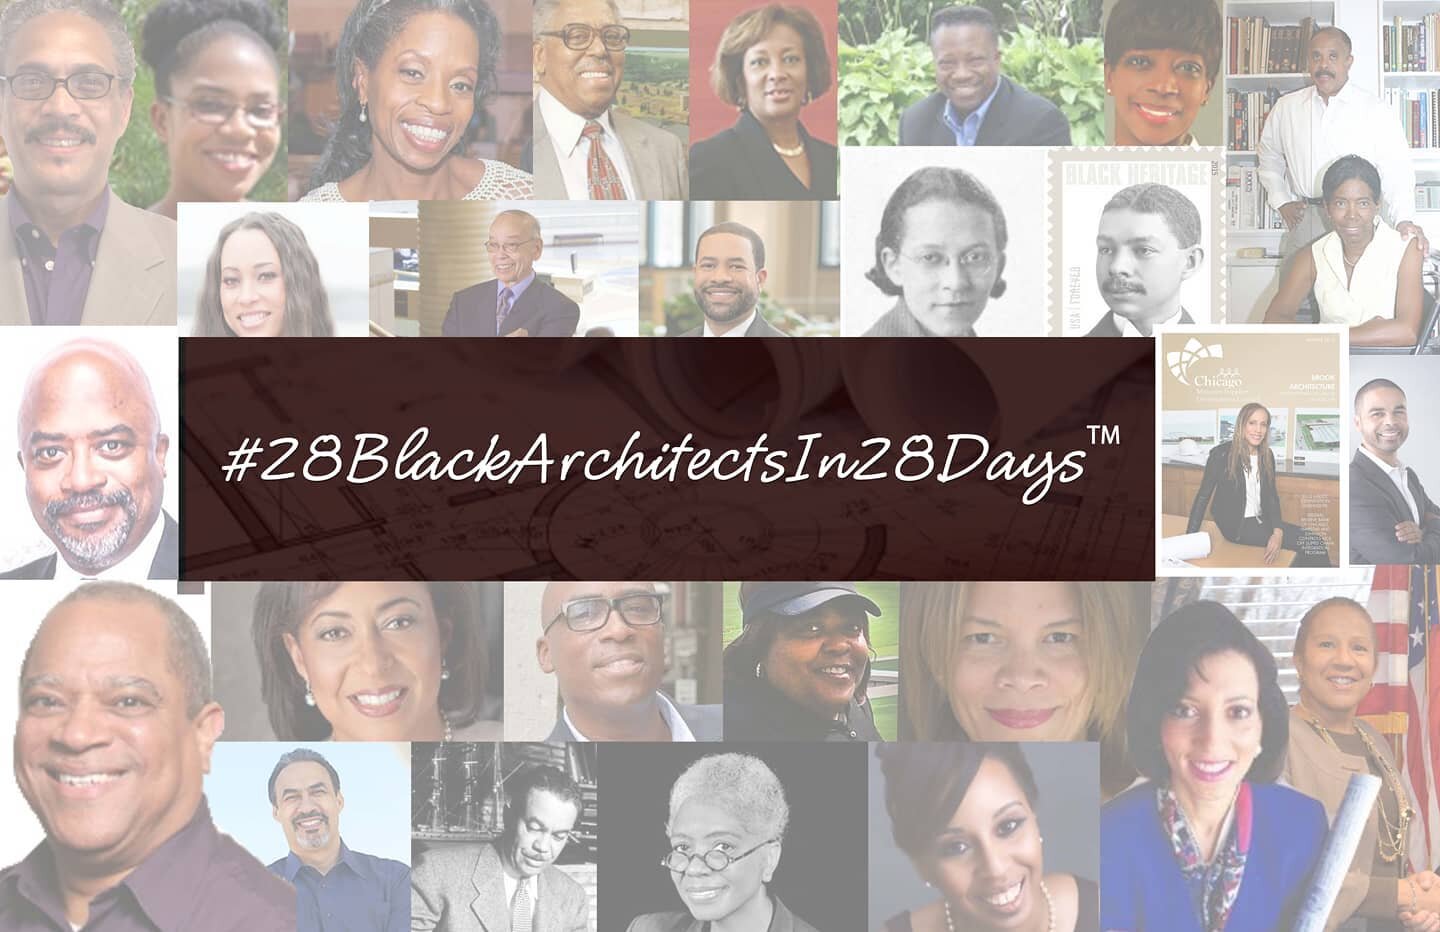 #28BlackArchitectsIn28days is back!! Be on the lookout for information of 28 Black Architects throughout Black History Month!

Like and Follow @28blackarchitectsin28days to keep up with the series!